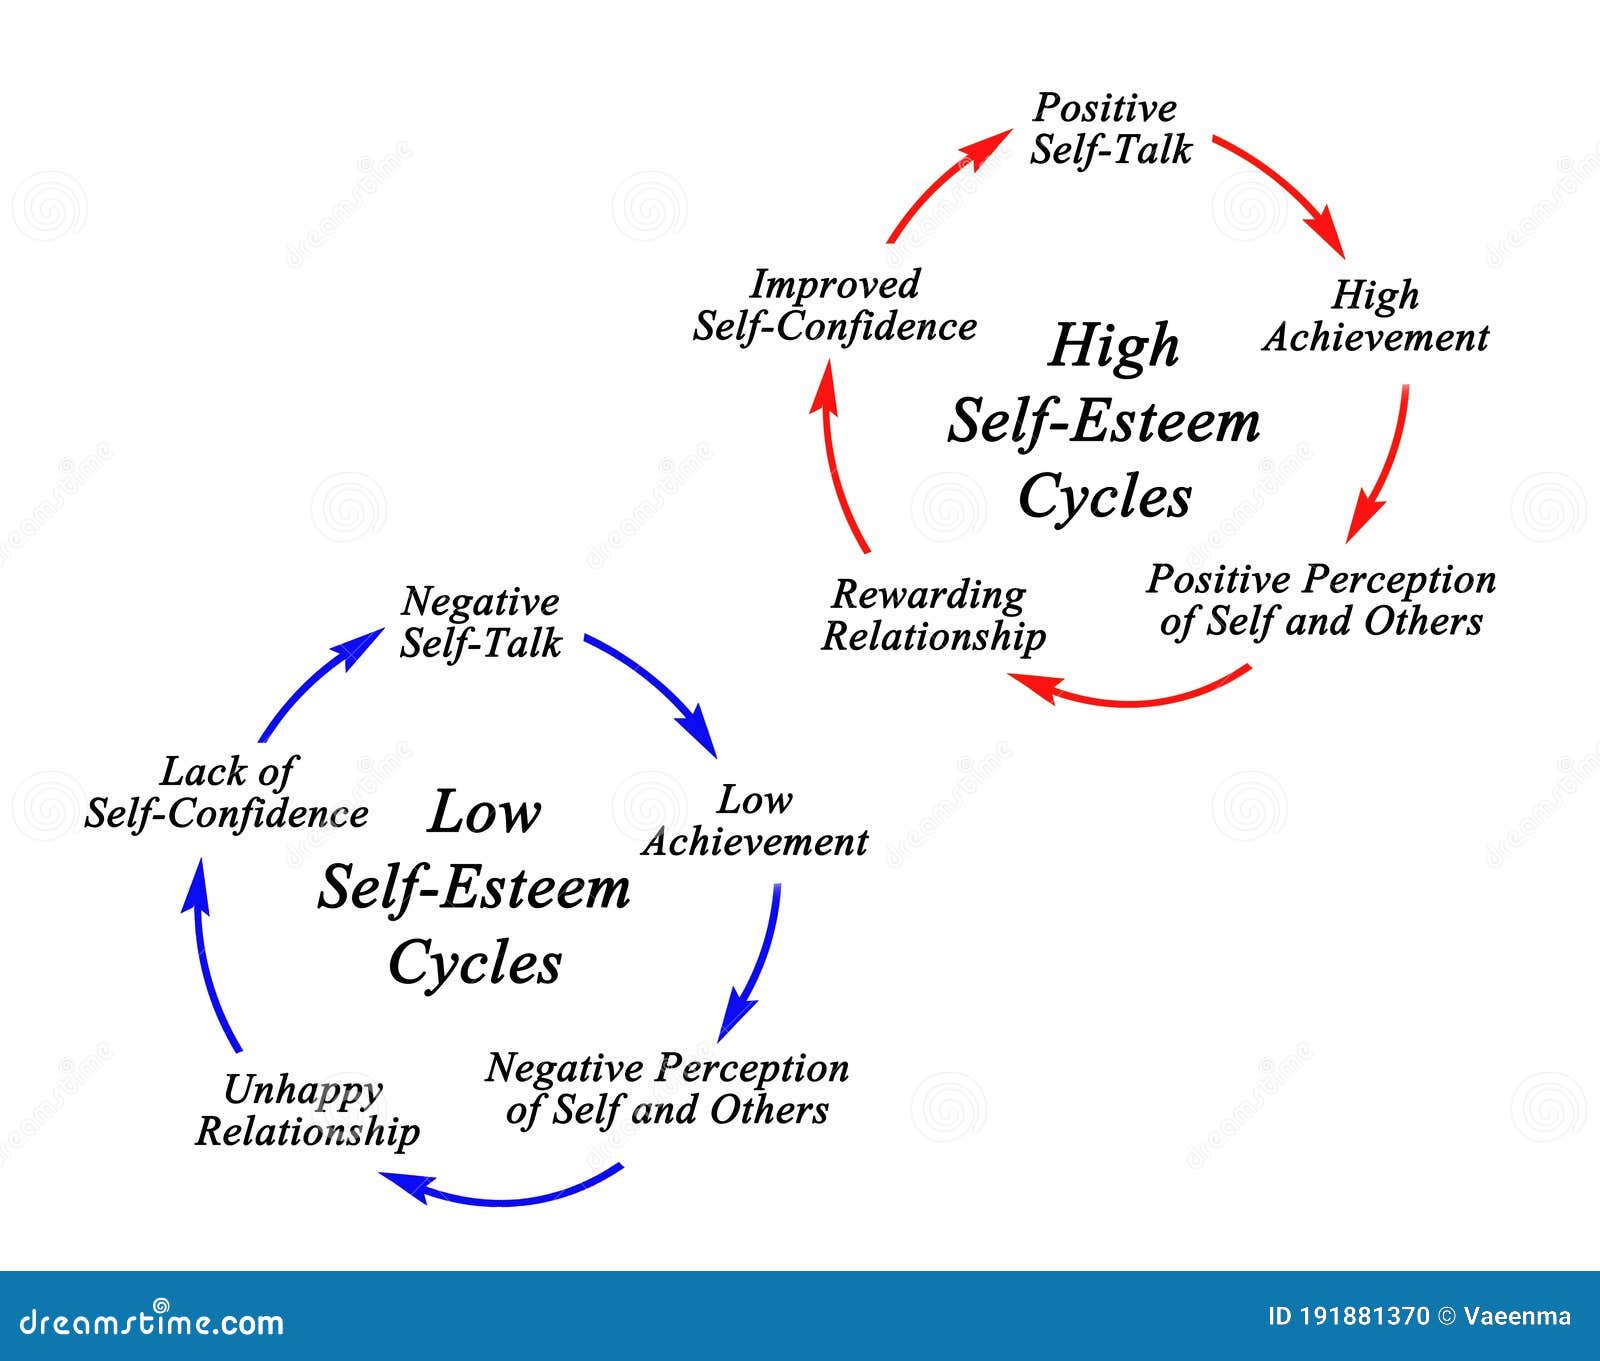 high and low self-esteem cycles